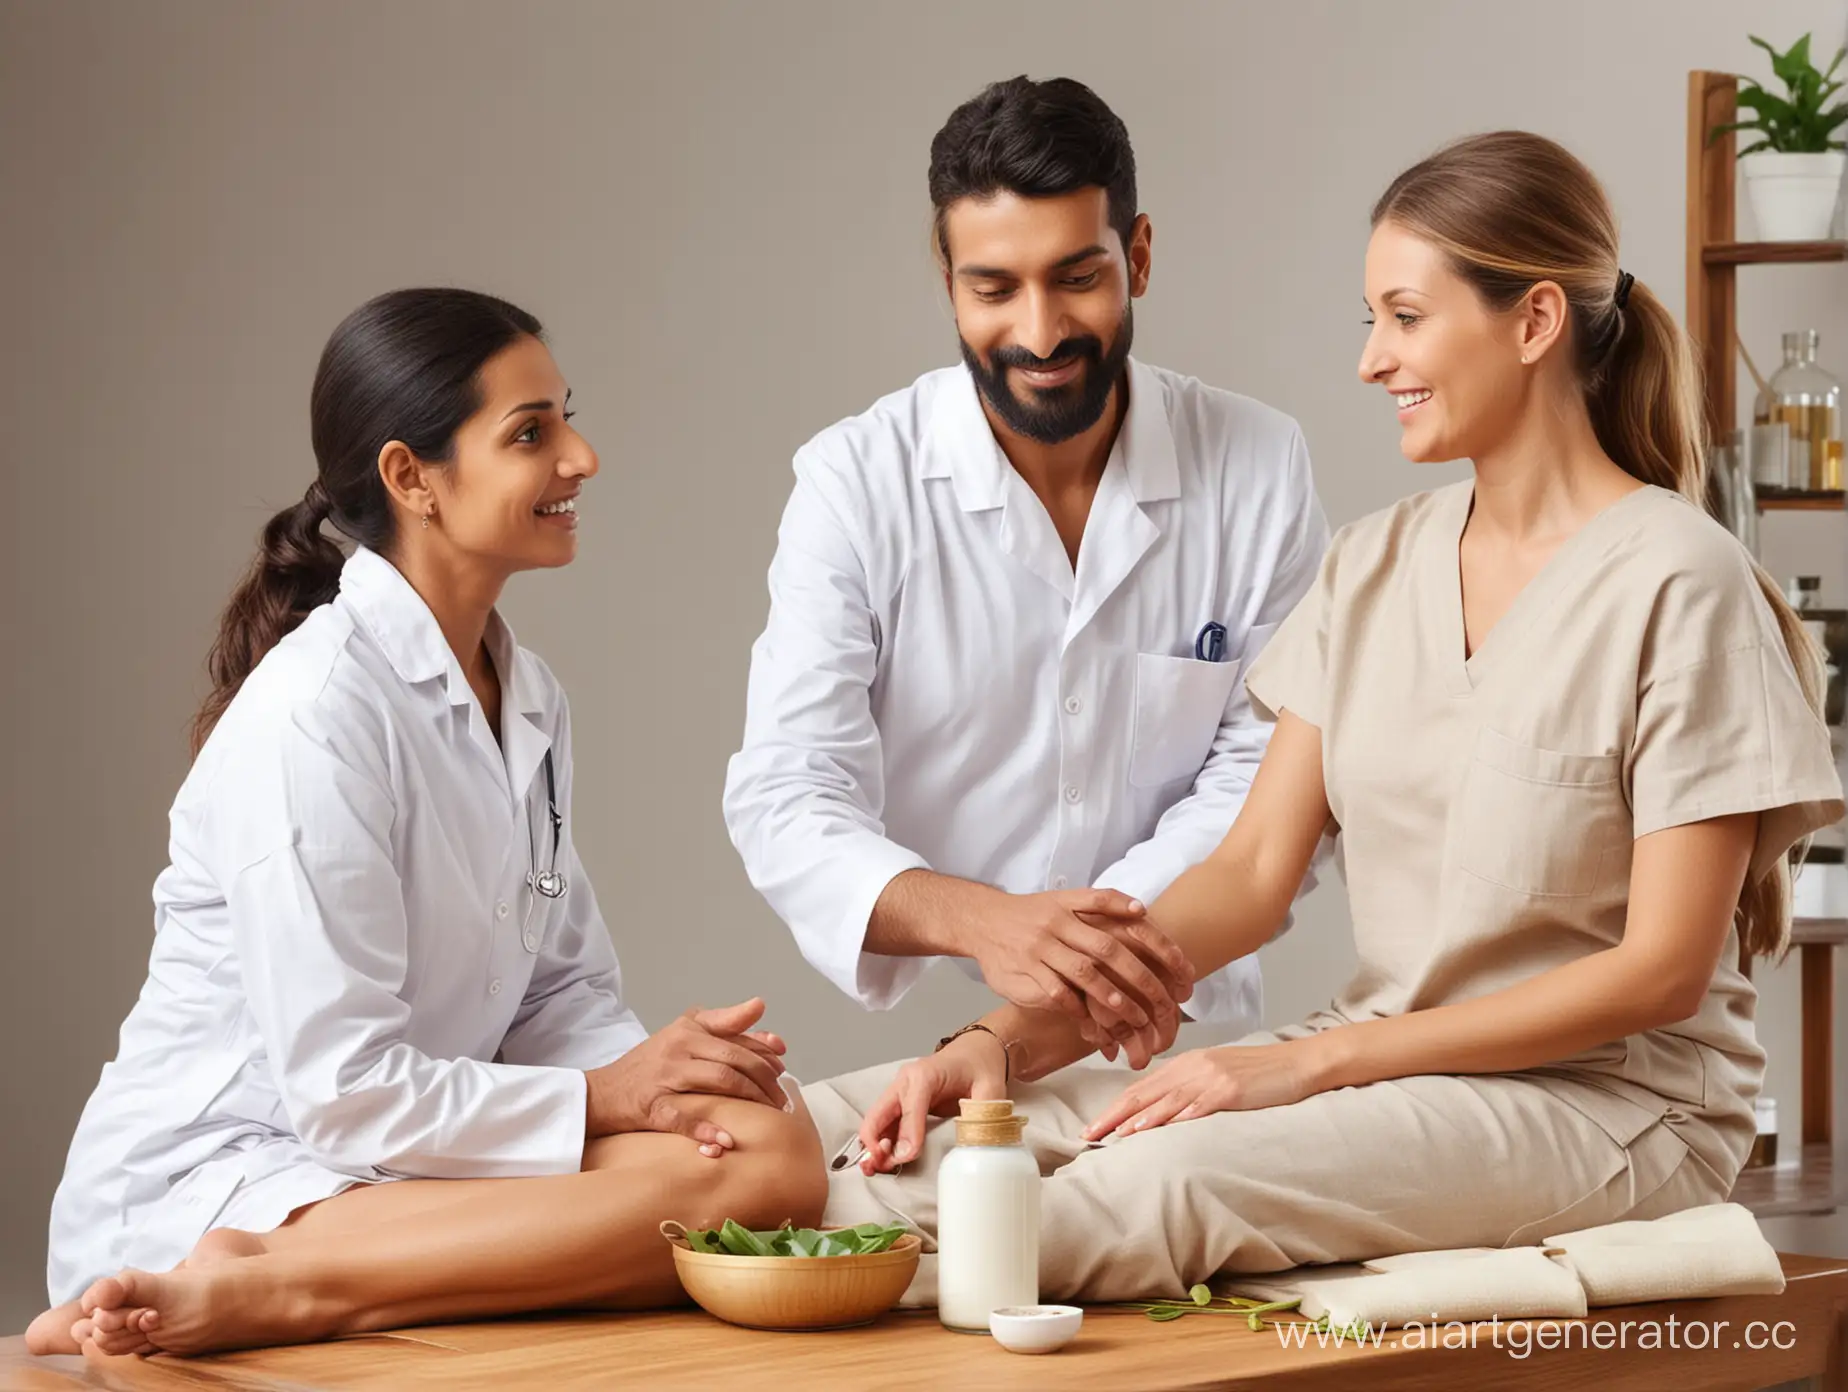 Ayurvedic-Consultation-Patient-and-Doctor-Discussing-Traditional-Medicine